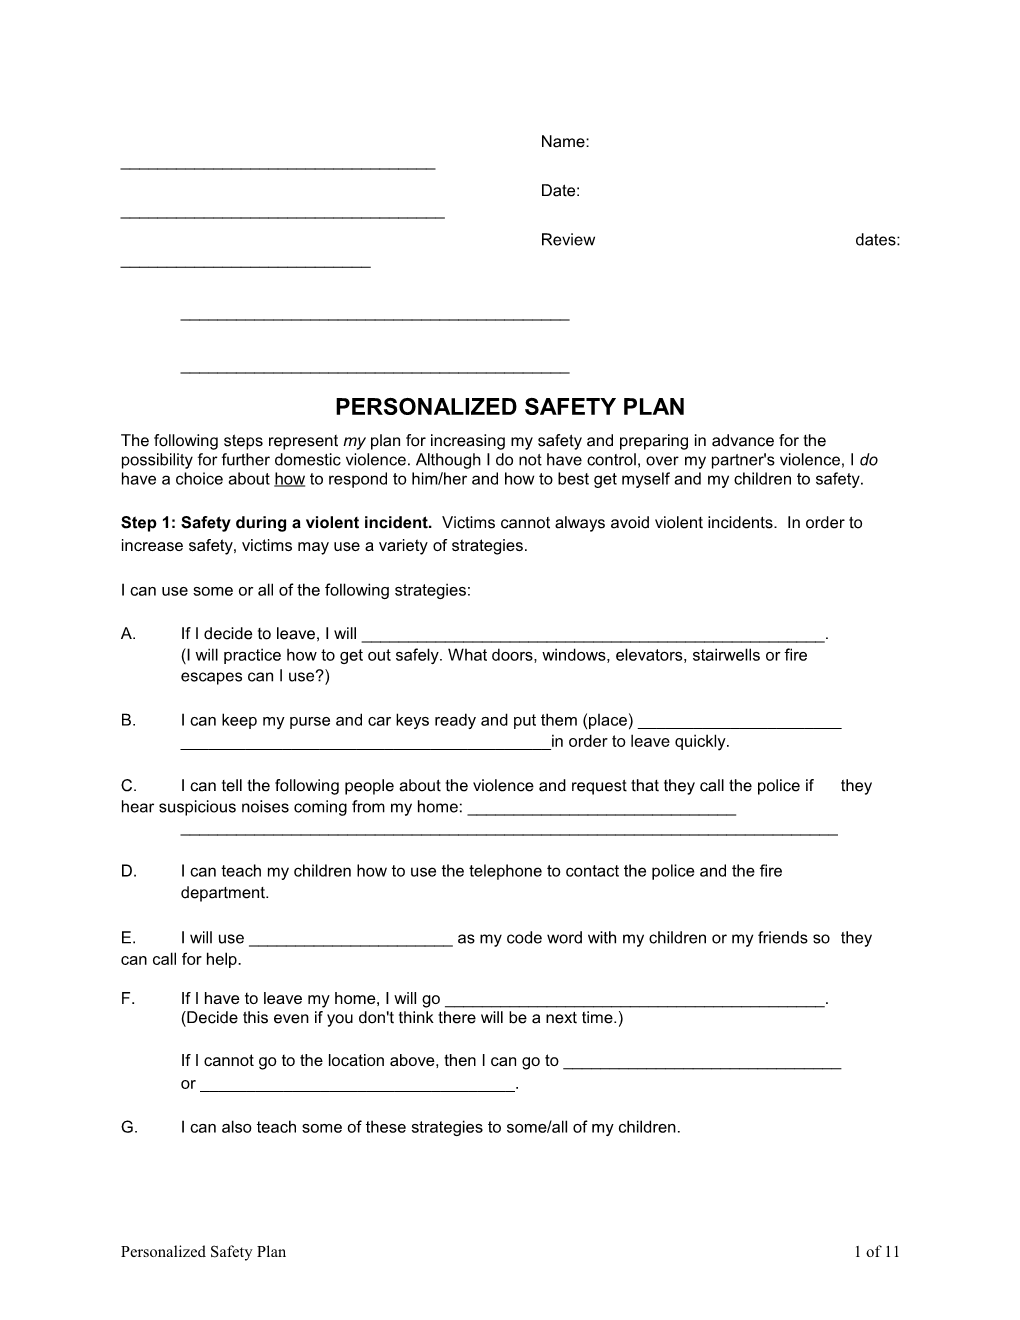 Personalized Safety Plan Sample